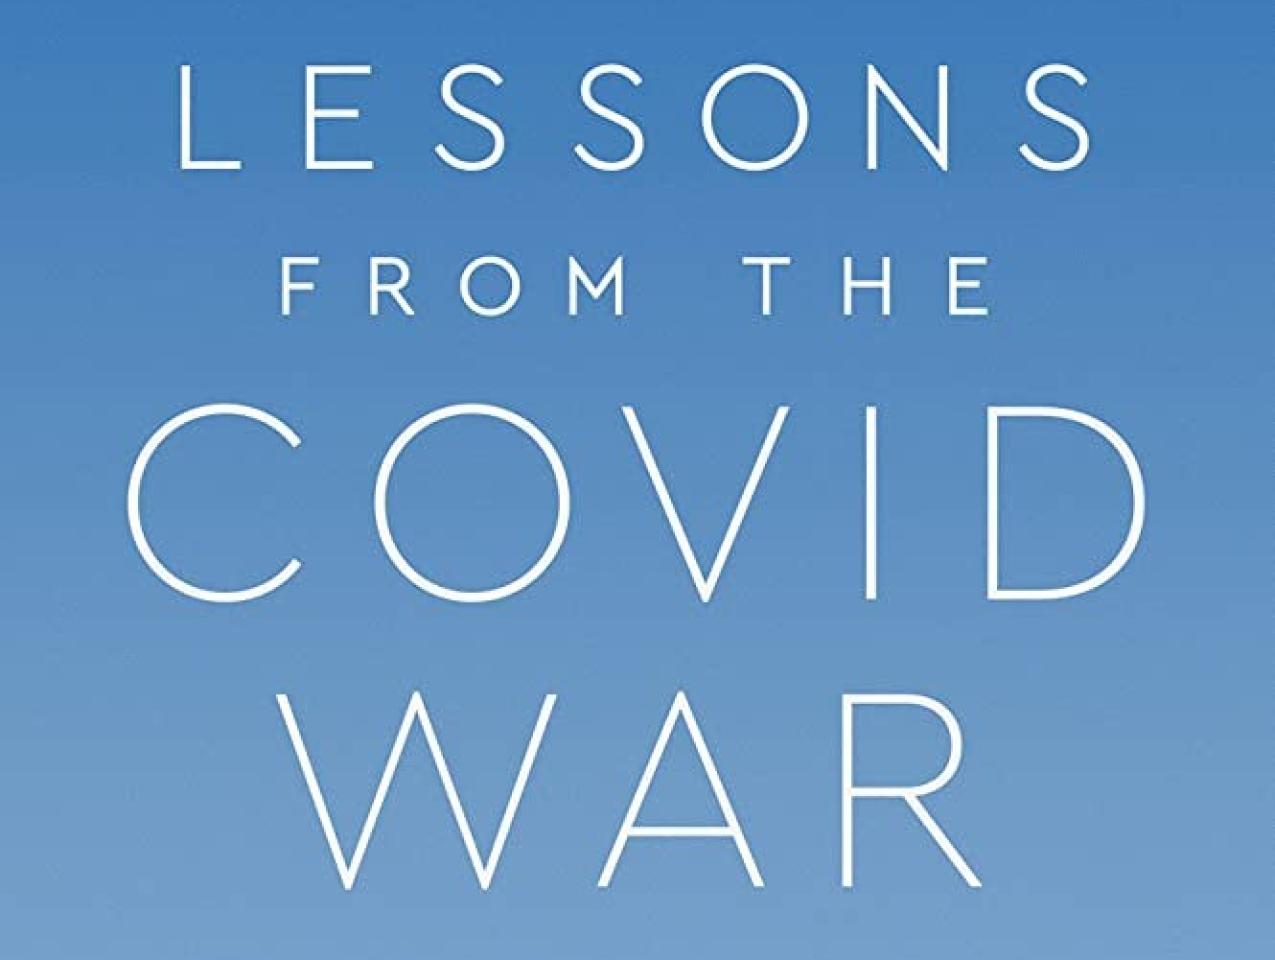 Lessons from the Covid War: An Investigative Report